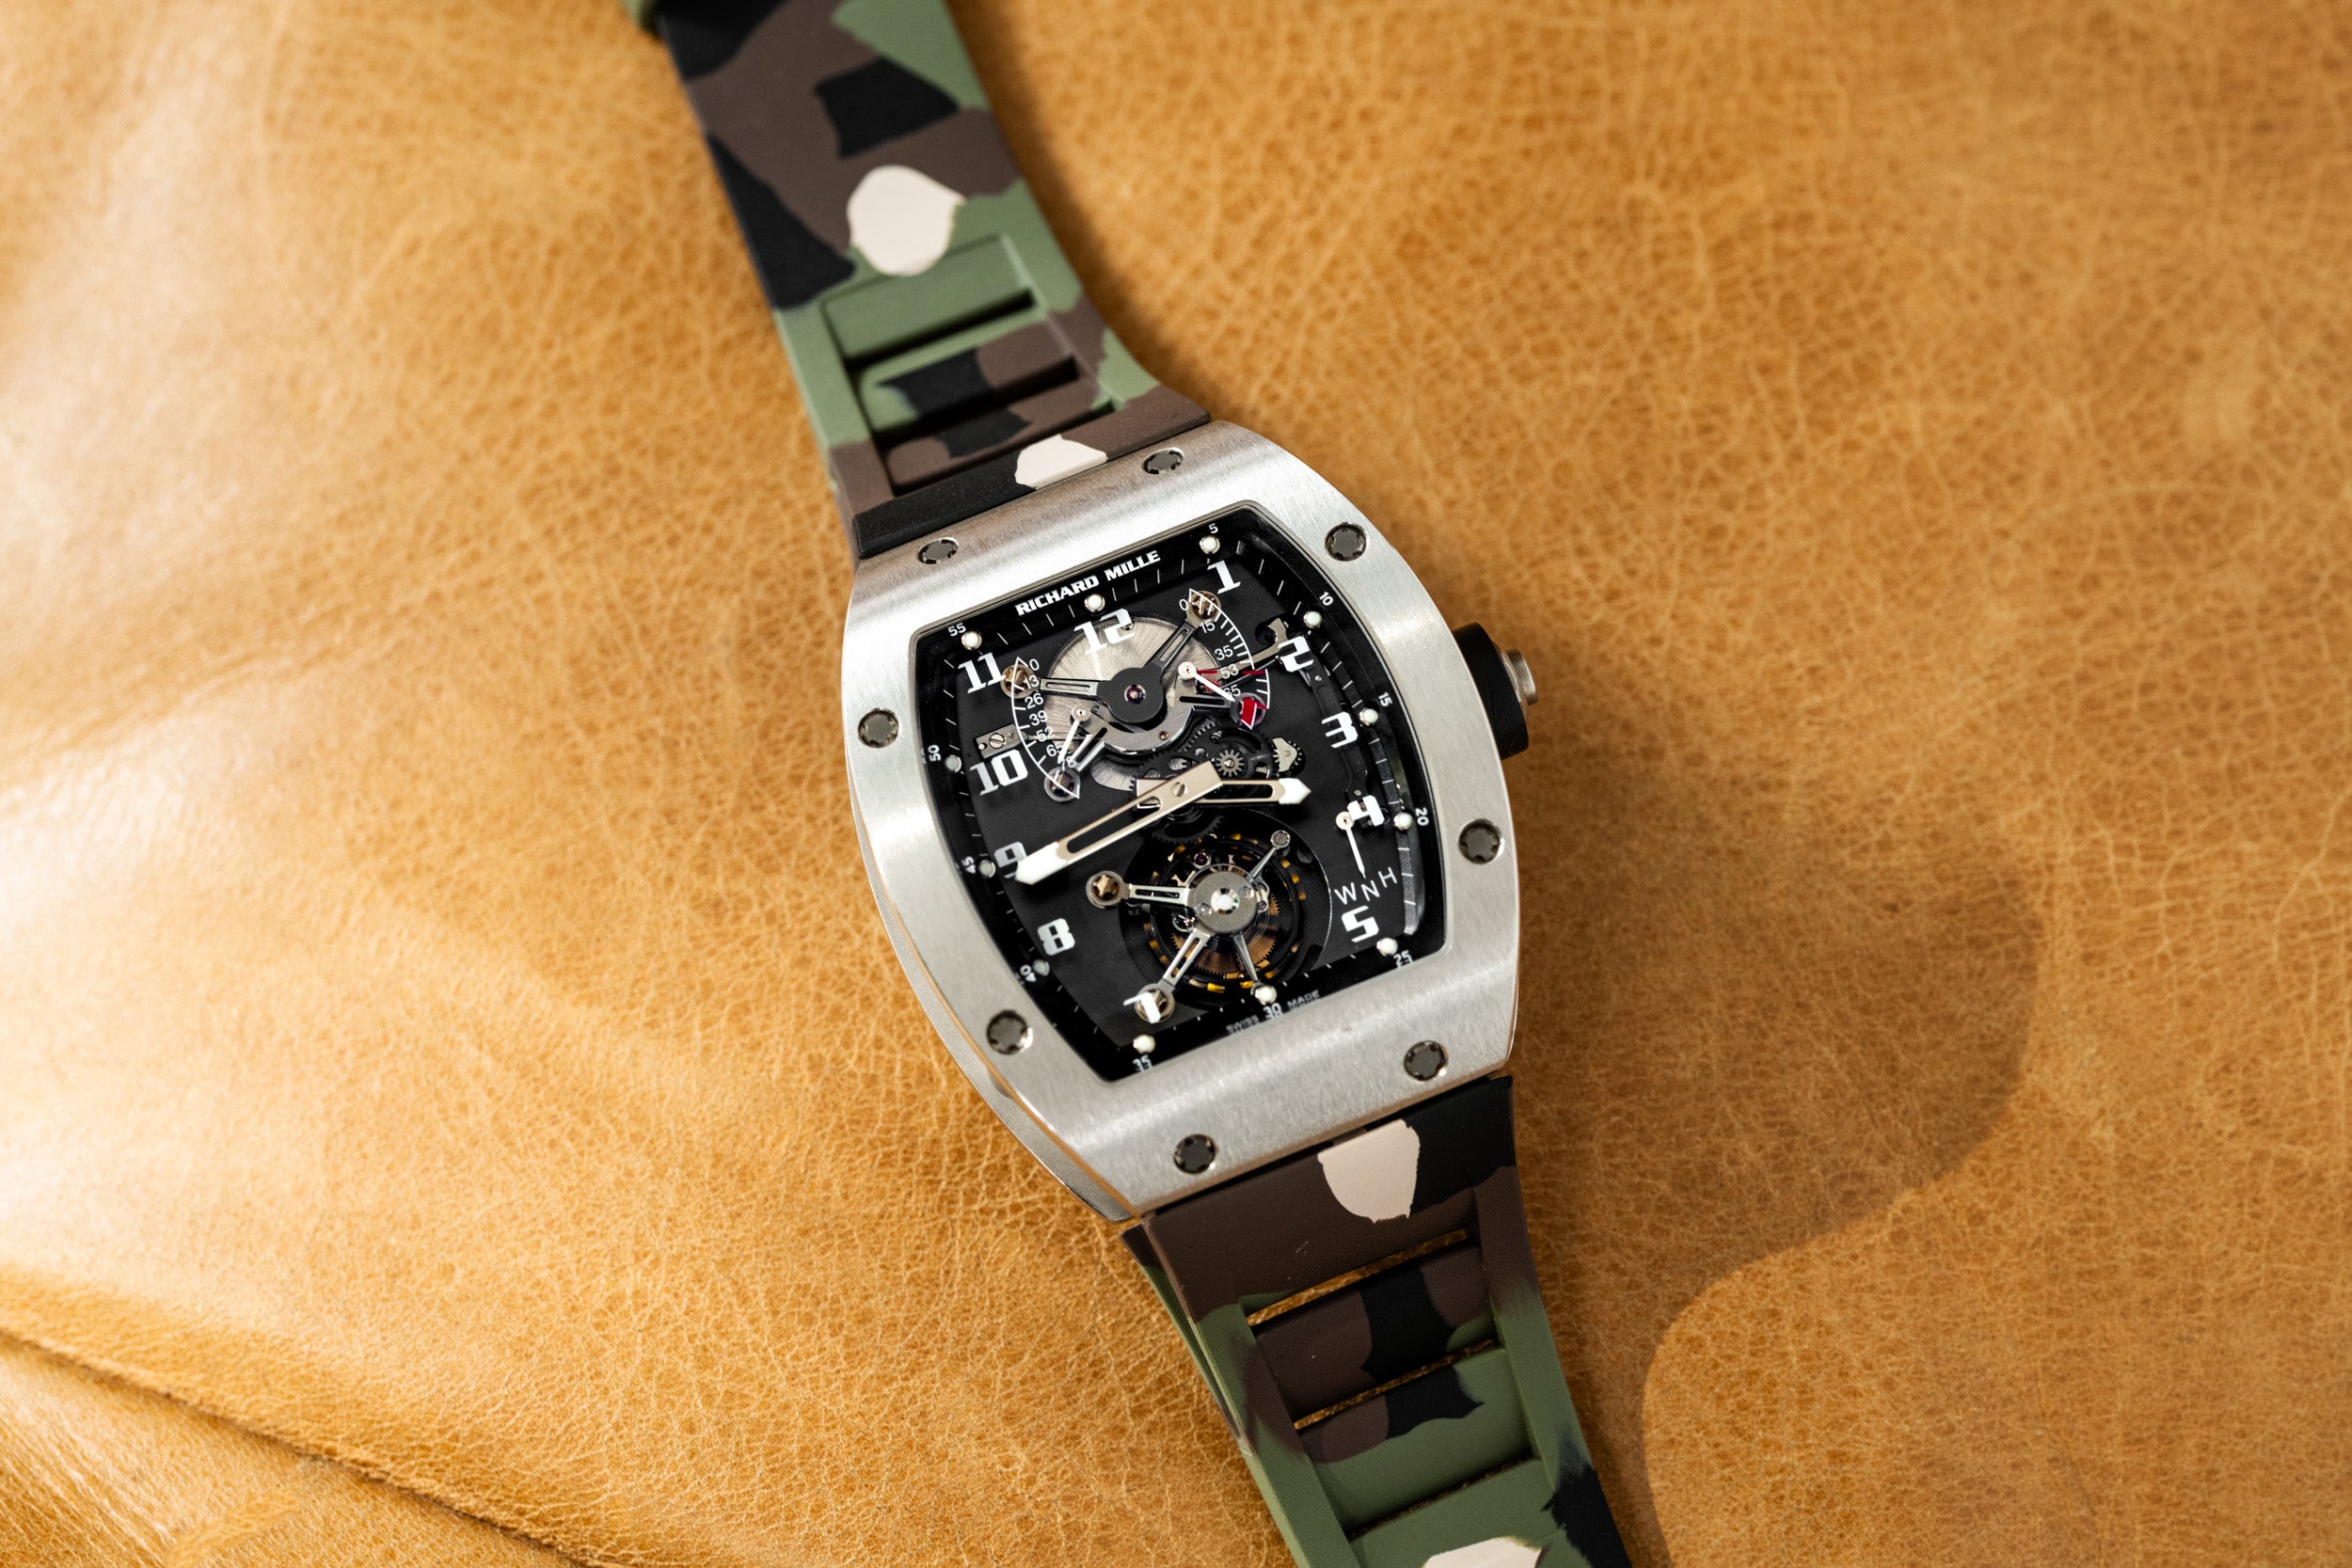 Pre-owned Richard Mille Watches, Why You Should Buy Them